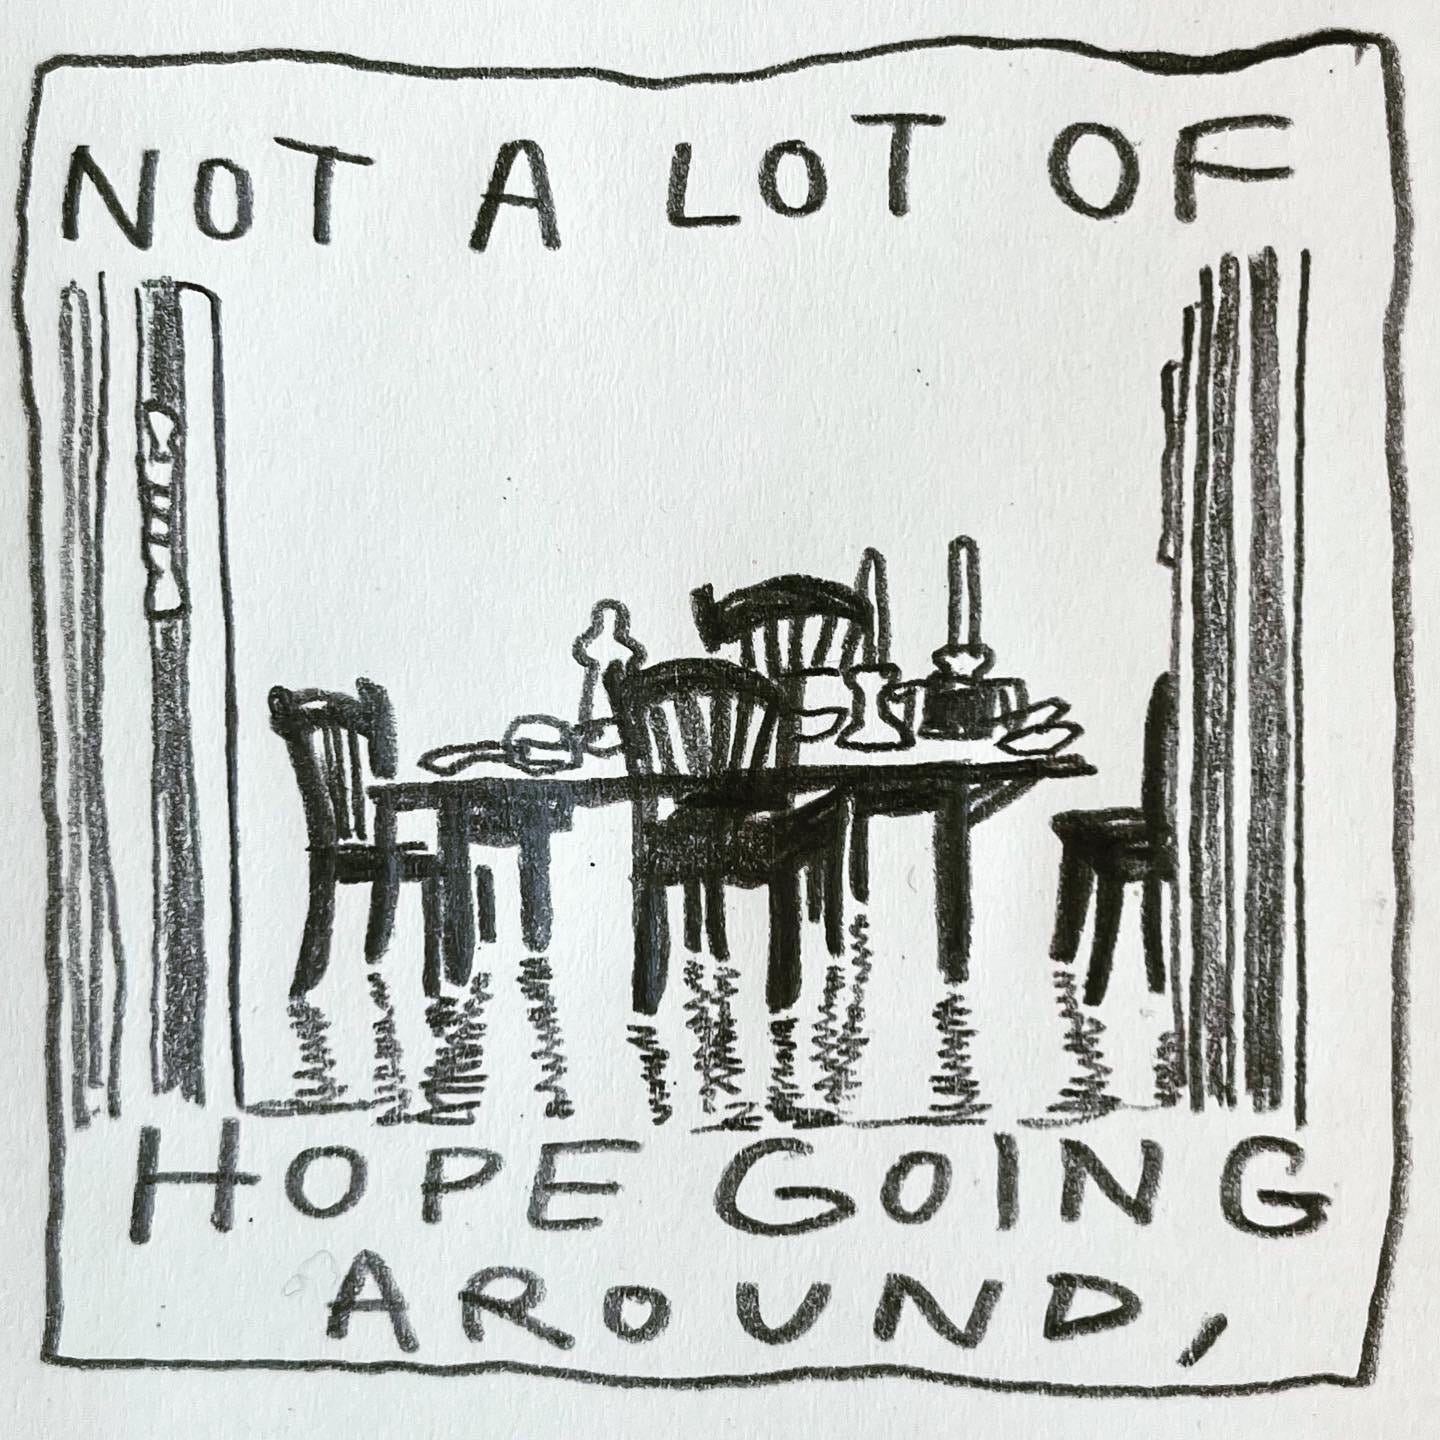 Panel 3: not a lot of hope going around, Image: An architectural drawing looking through a doorway to a table surrounded by four dark chairs. Indecipherable objects and two candlesticks sit on the table. The reflection of the chairs and table are dark and watery on the floor.